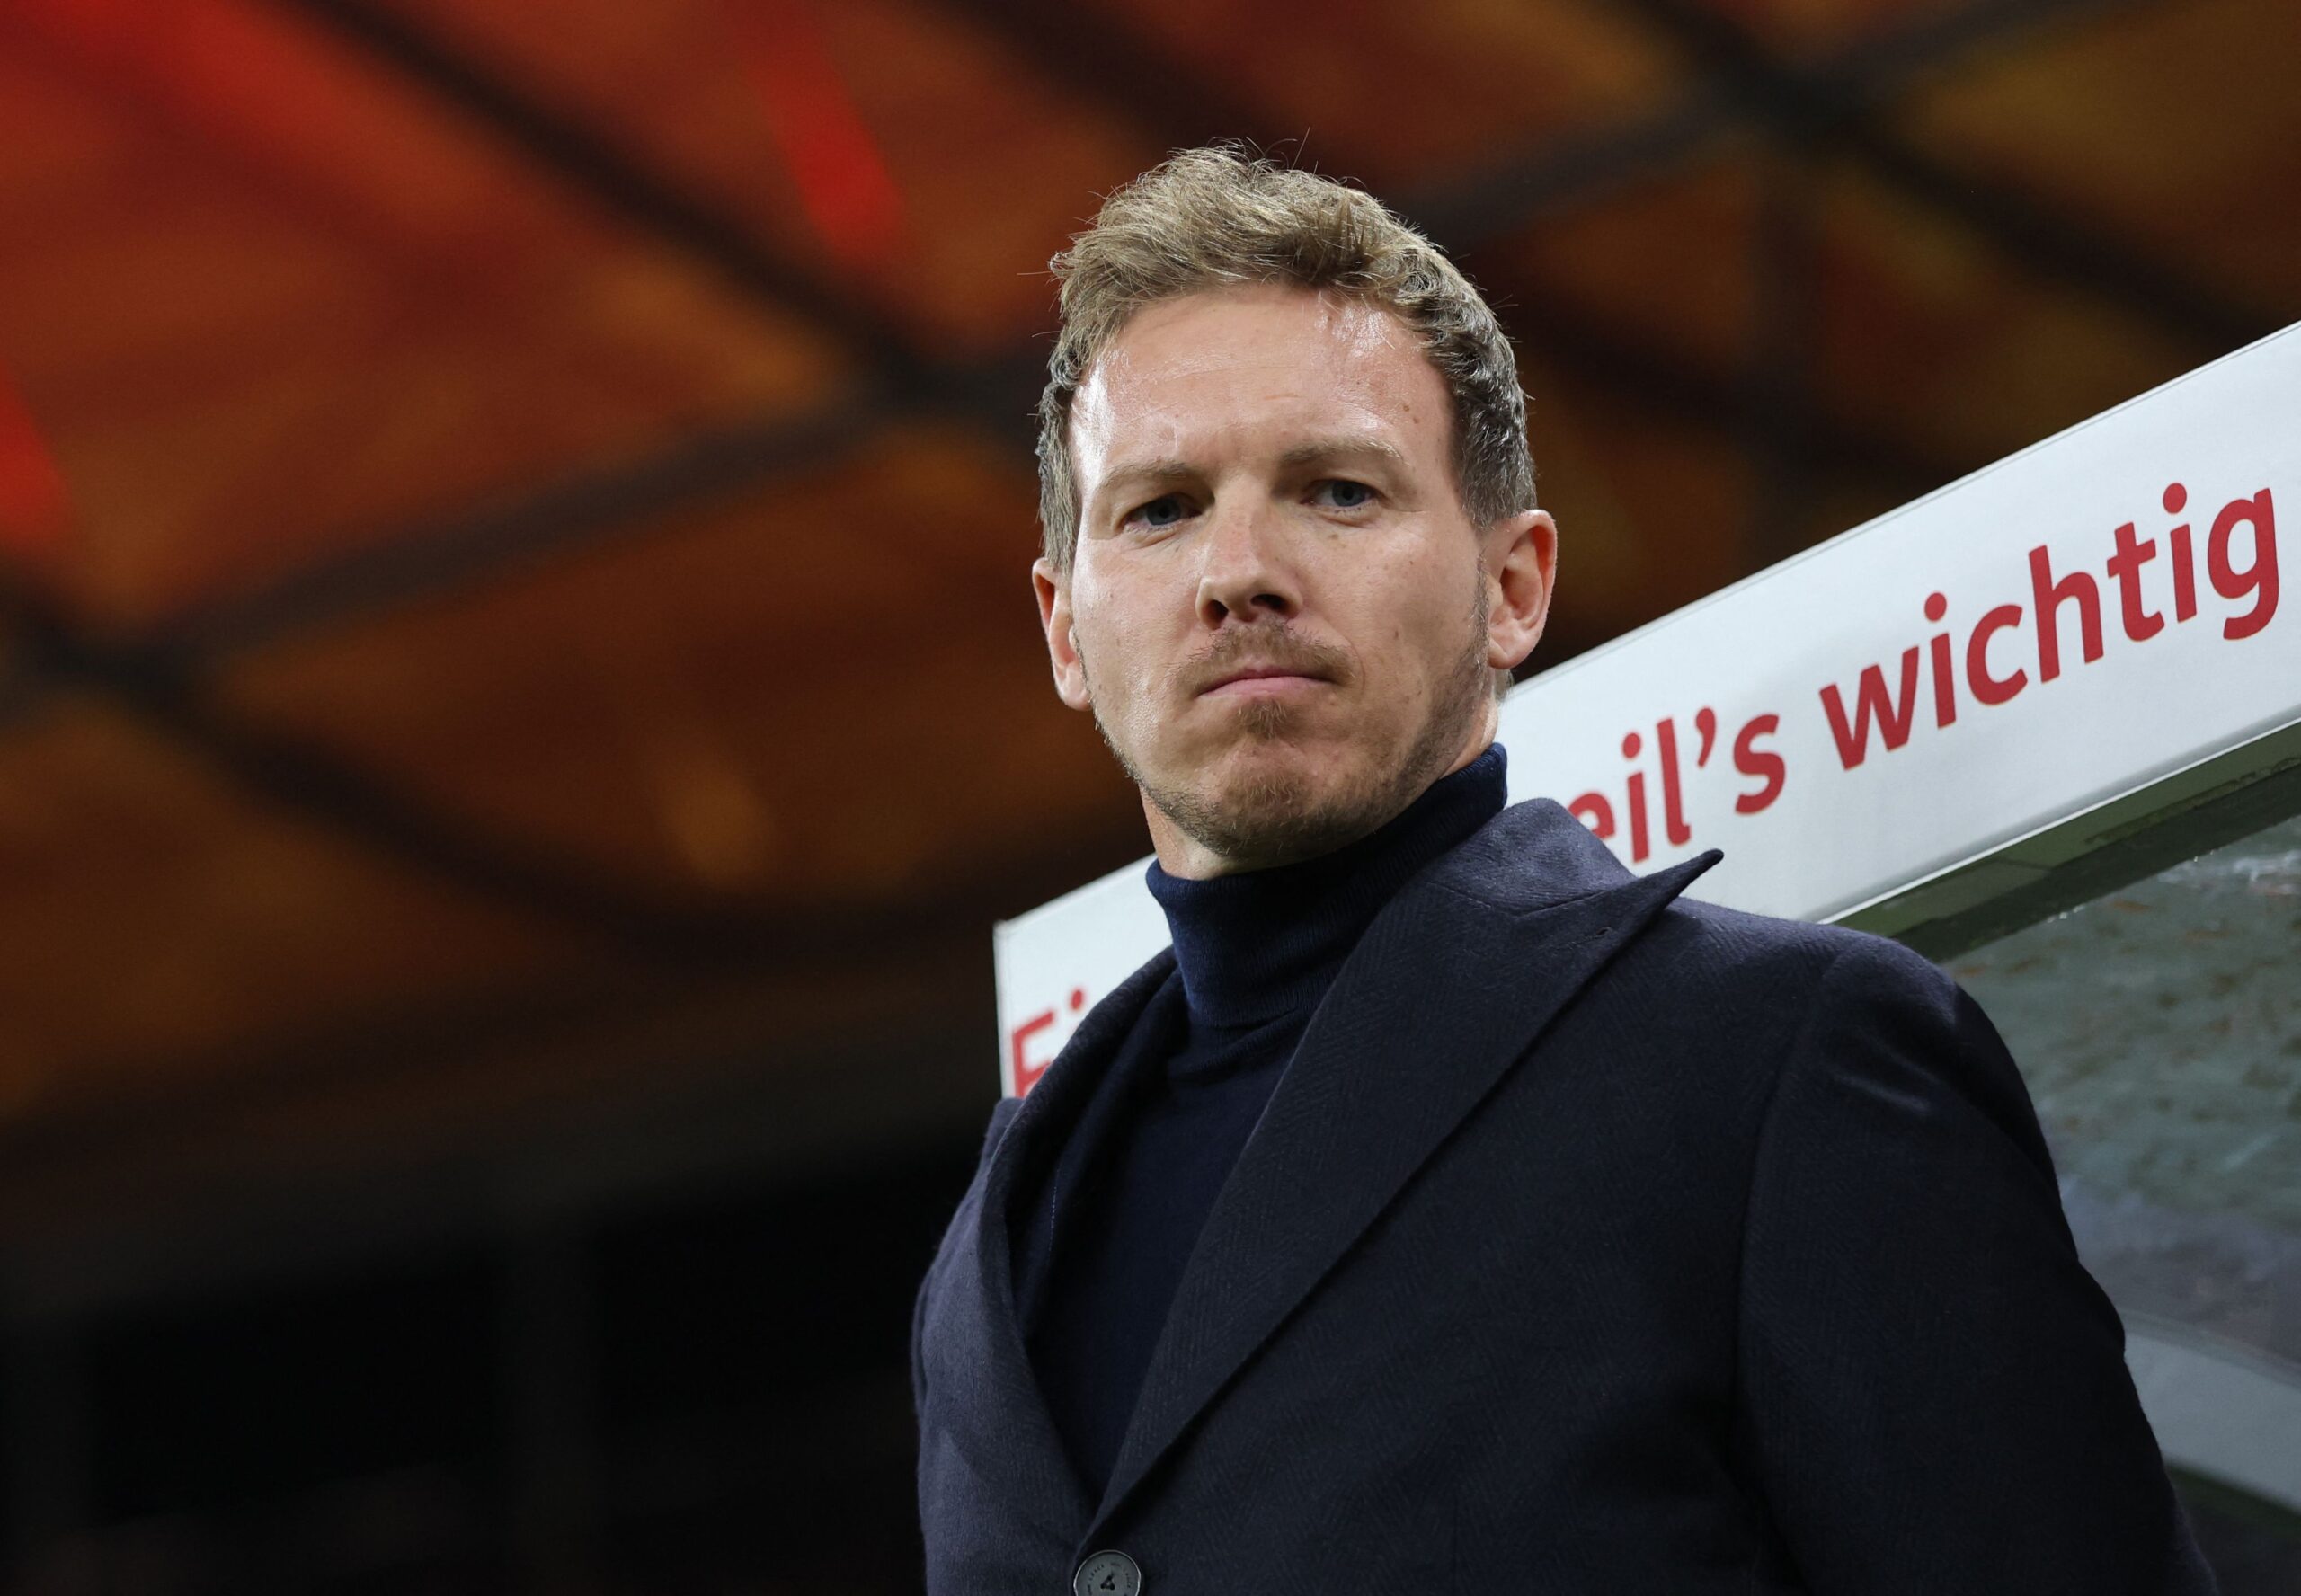 Germany's head coach Julian Nagelsmann looks on during the international friendly football match between Germany and Turkey at the Olympic Stadium in Berlin on November 18, 2023, in preparation for the UEFA Euro 2024 in Germany.